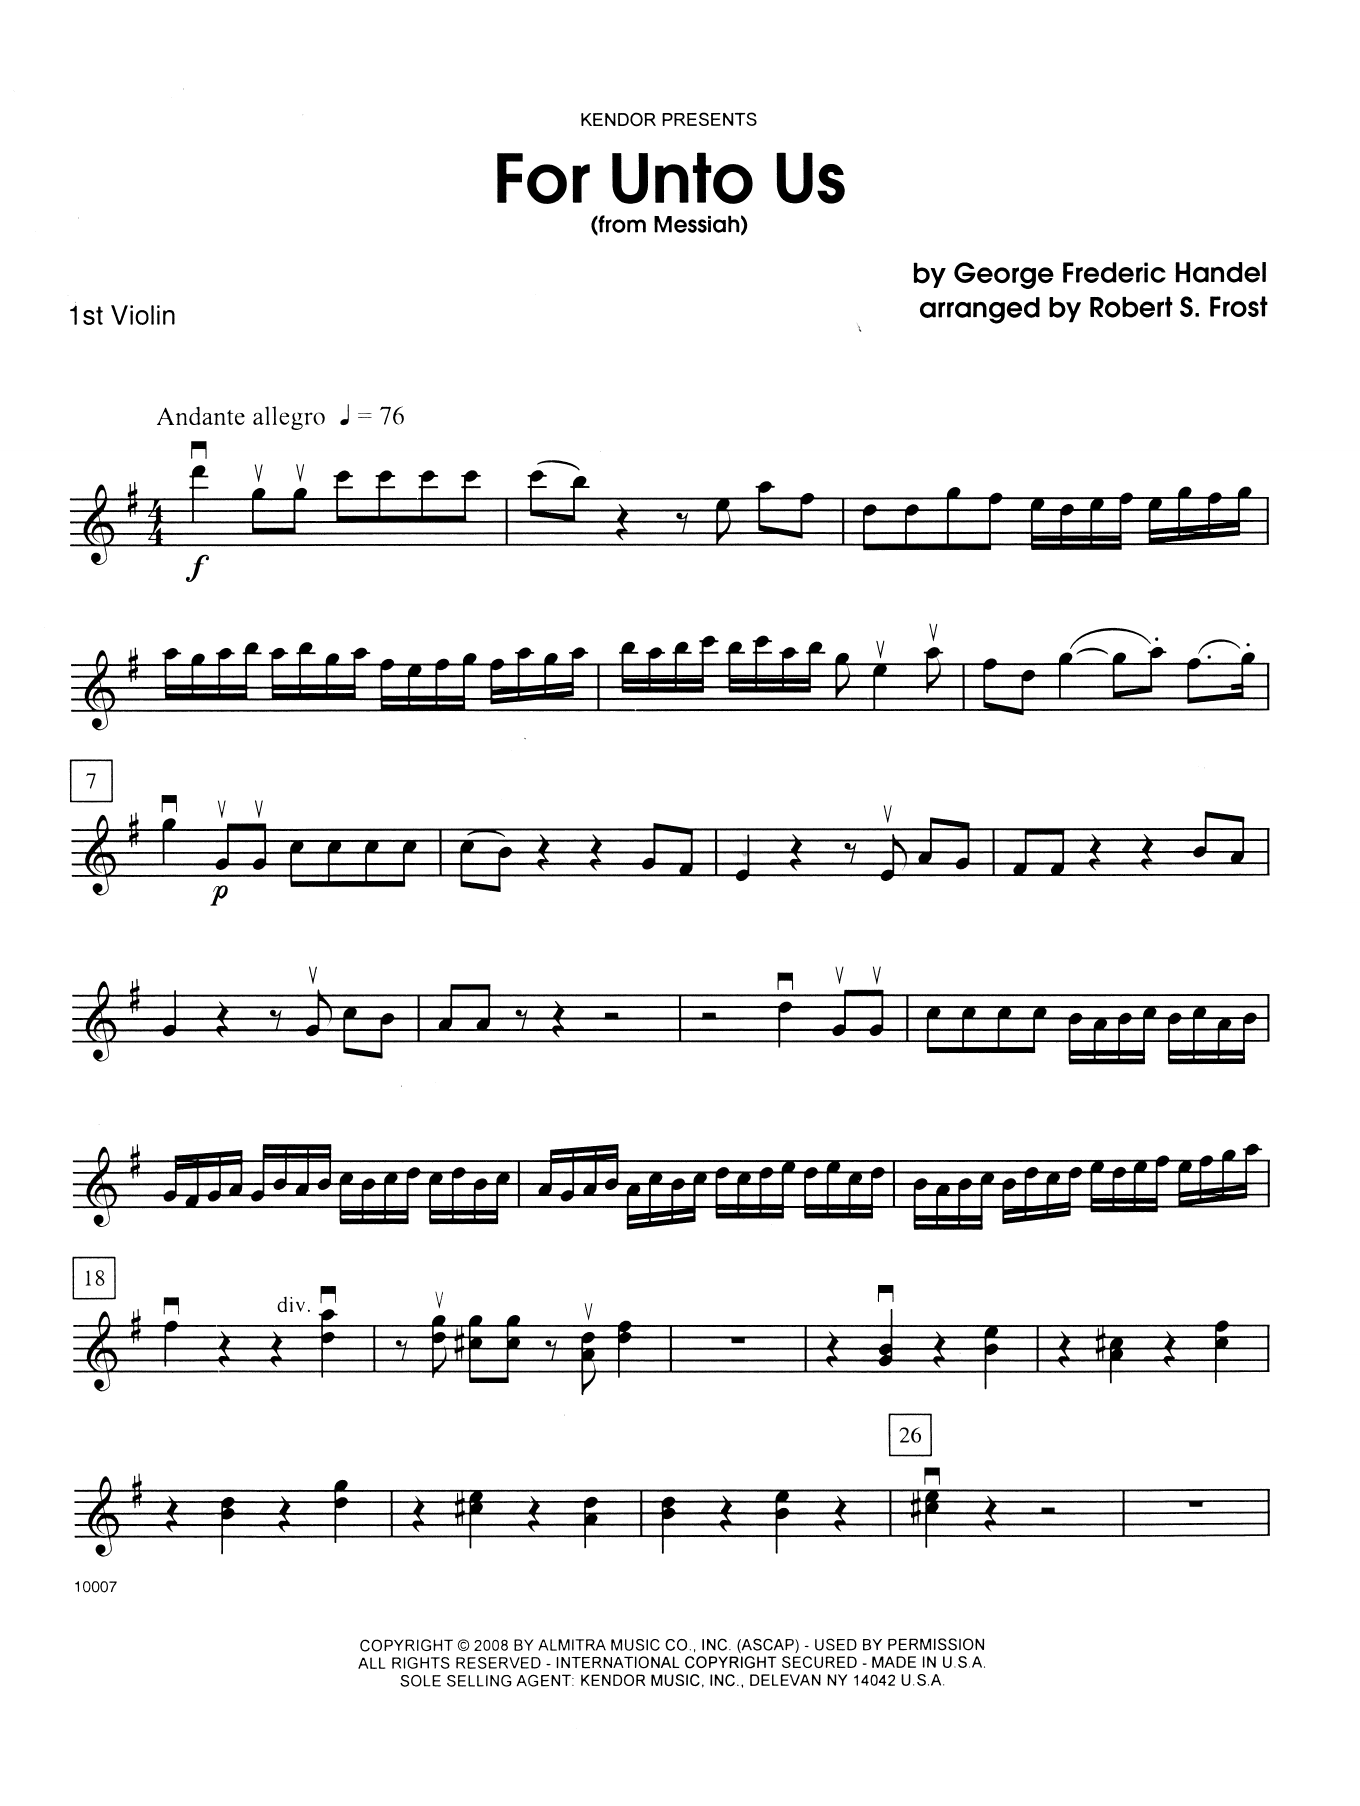 Download George Frideric Handel For Unto Us (from Messiah) - 1st Violin Sheet Music